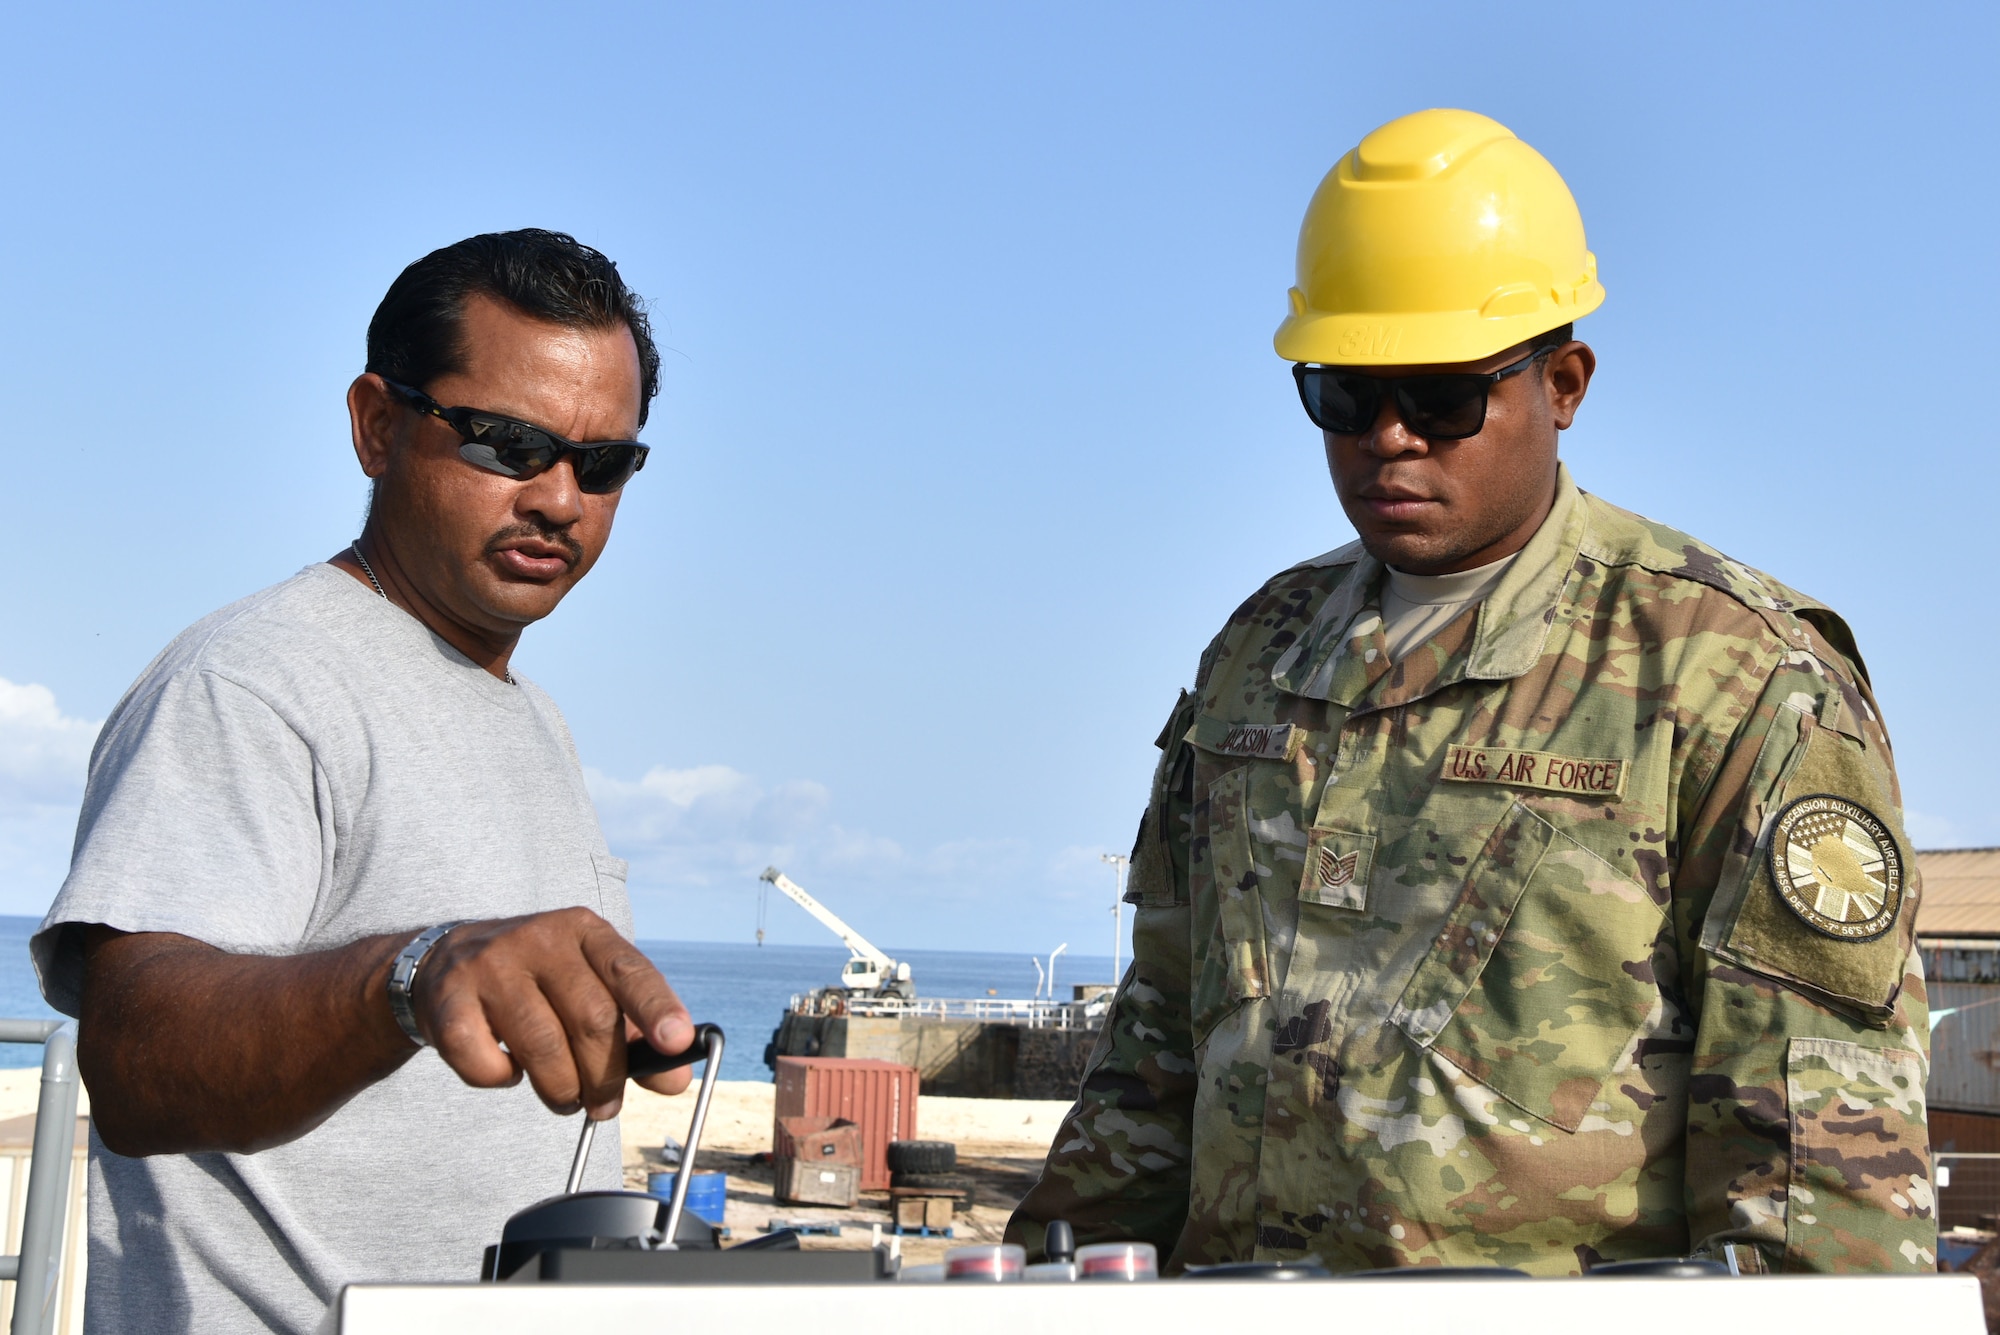 Tech. Sgt. Johntavion Jackson, 45th Civil Engineering Squadron contracting officer, looks over barge operating controls with an Ascension Island contractor, January 17, 2019 at Ascension Island Auxiliary Airfield. When Ascension receives supplies by ship, they can use barges to deliver supplies to the island. (U.S. Air Force photo by Airman 1st Class Dalton Williams)